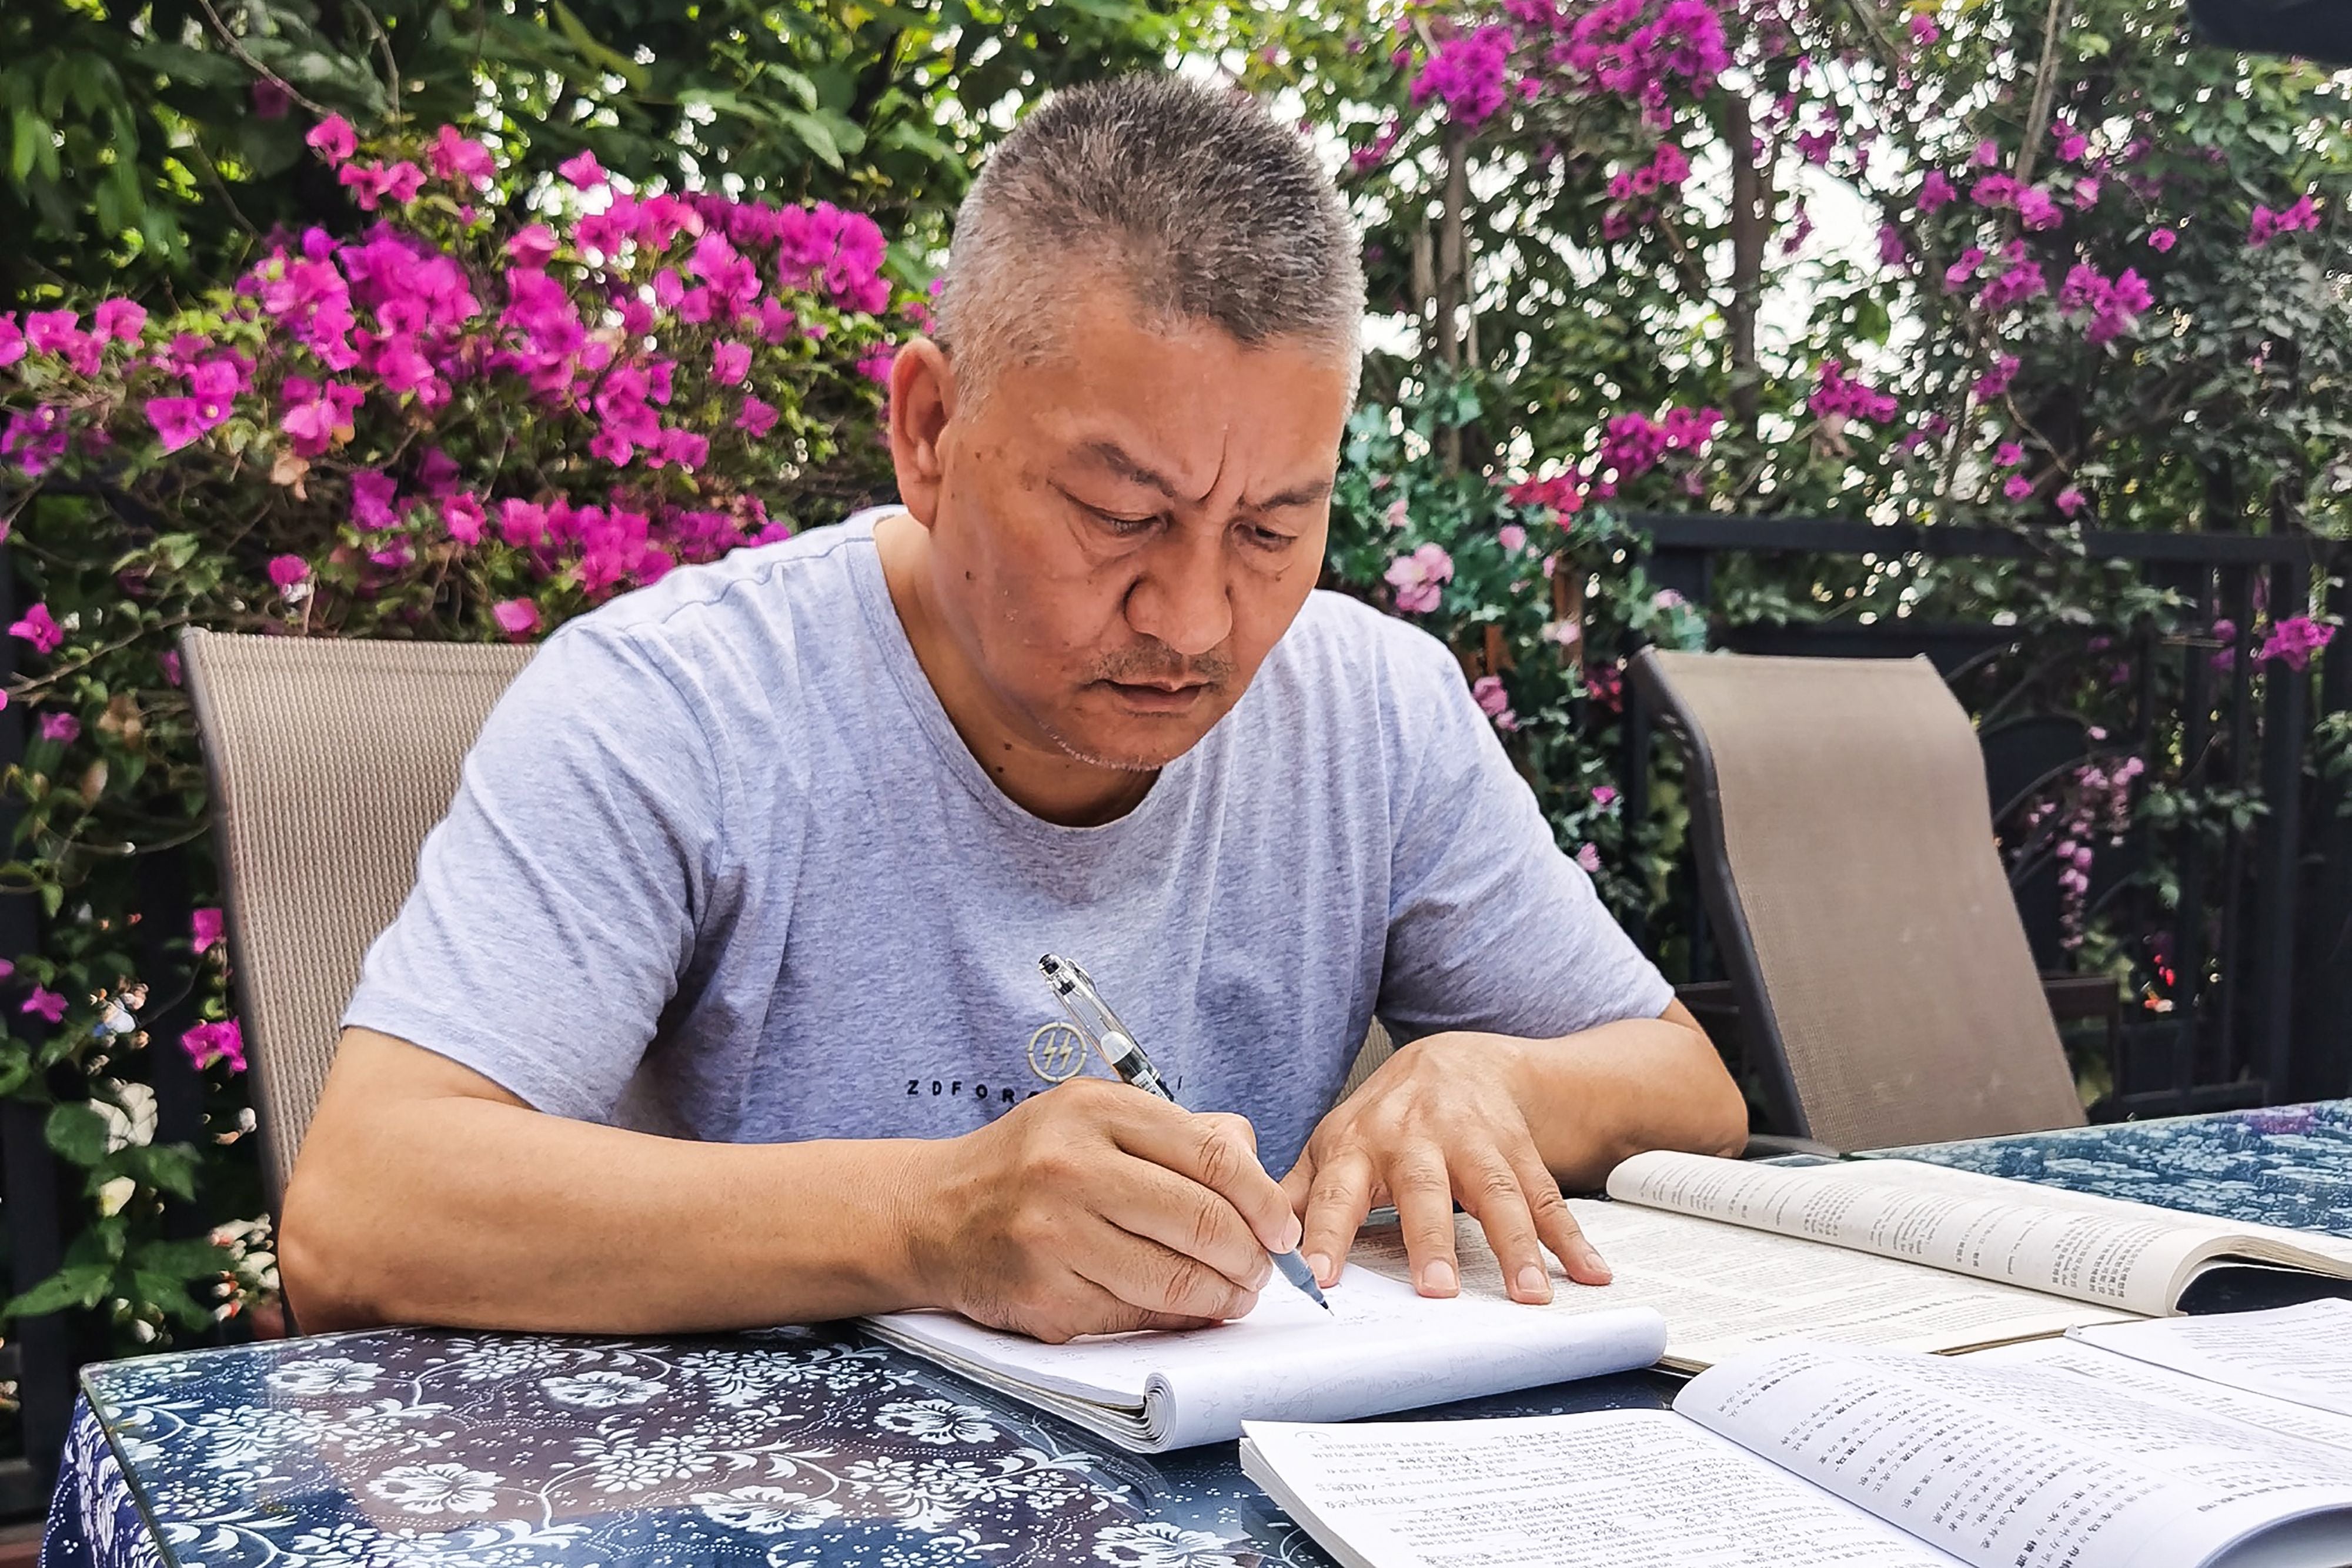 Liang Shi going through exam papers ahead of the exam in Chengdu, in China’s southwestern Sichuan province